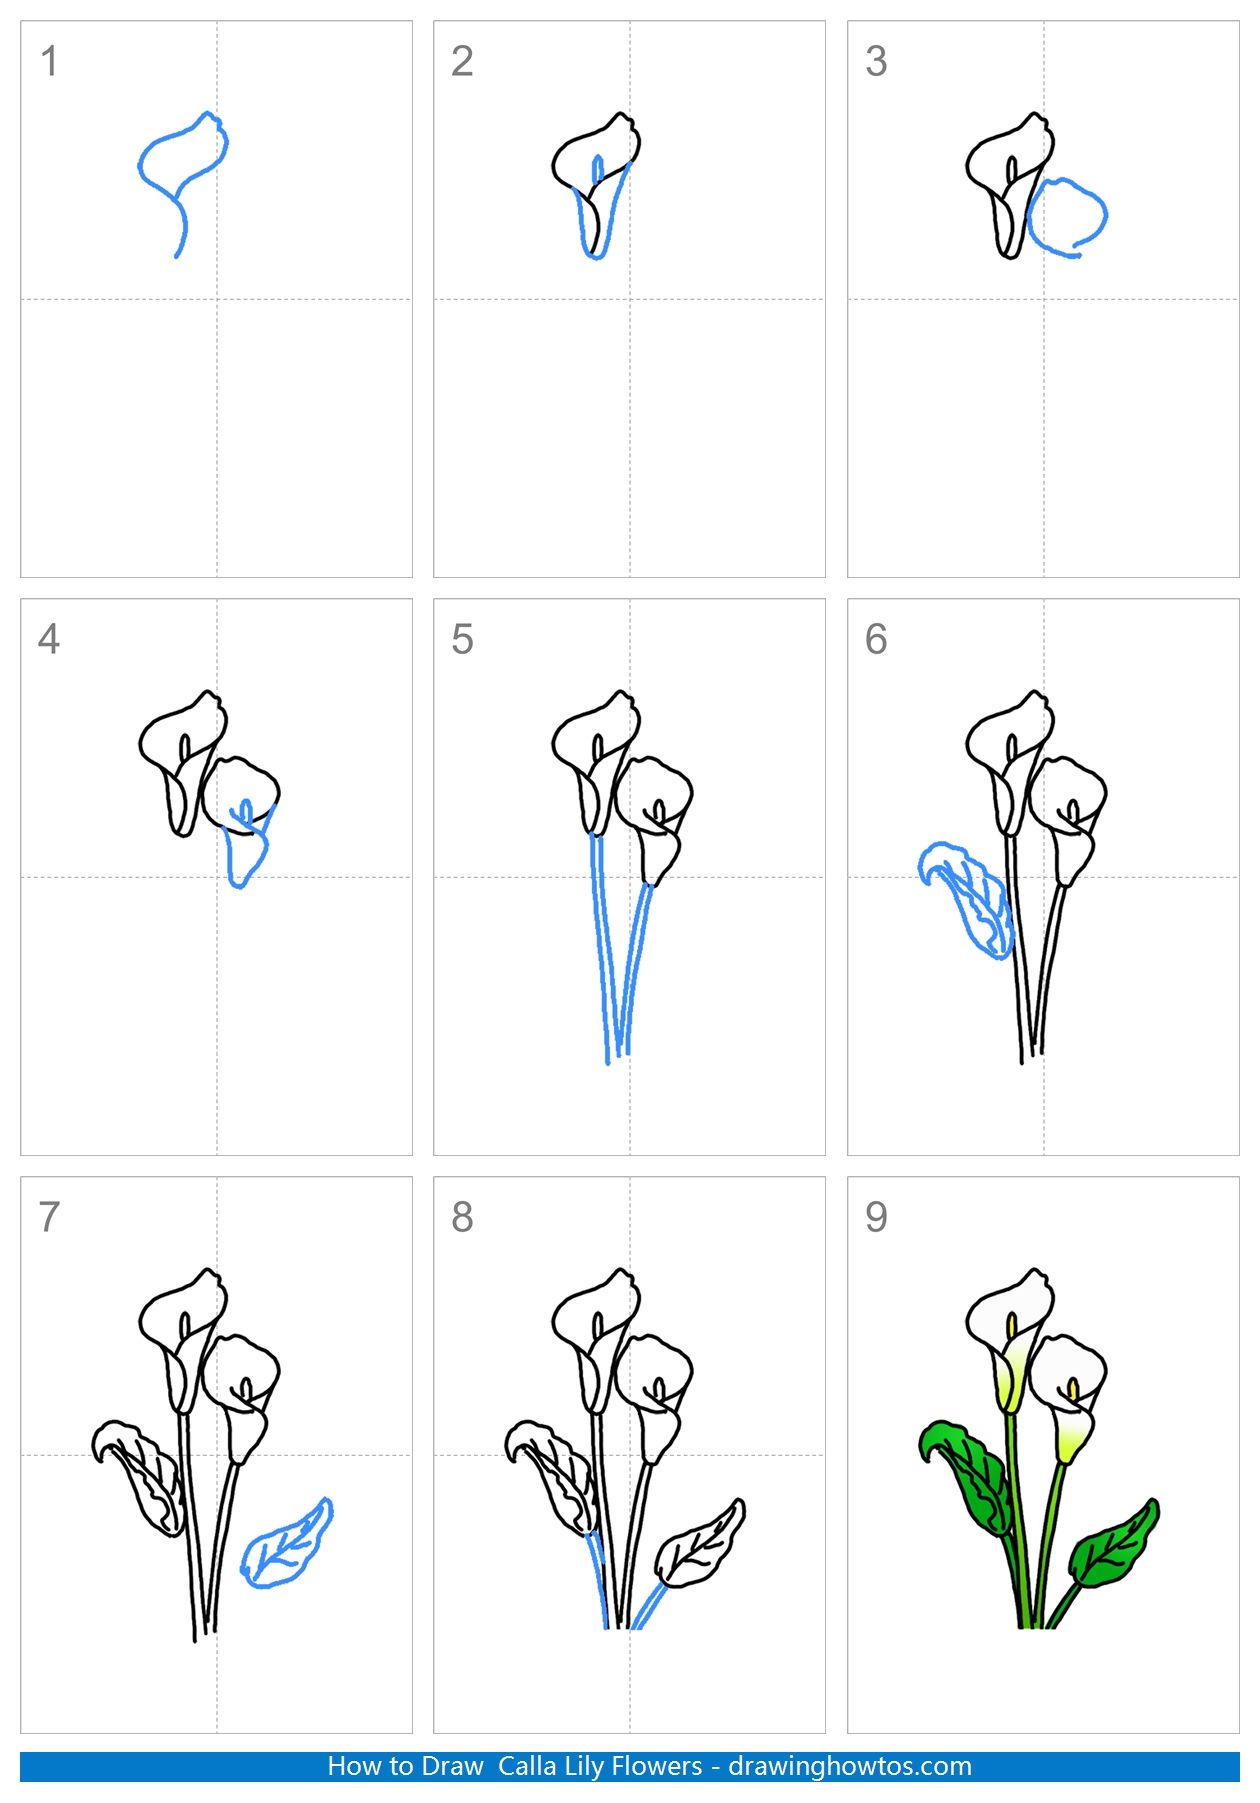 How to Draw Calla Lily Flowers Step by Step